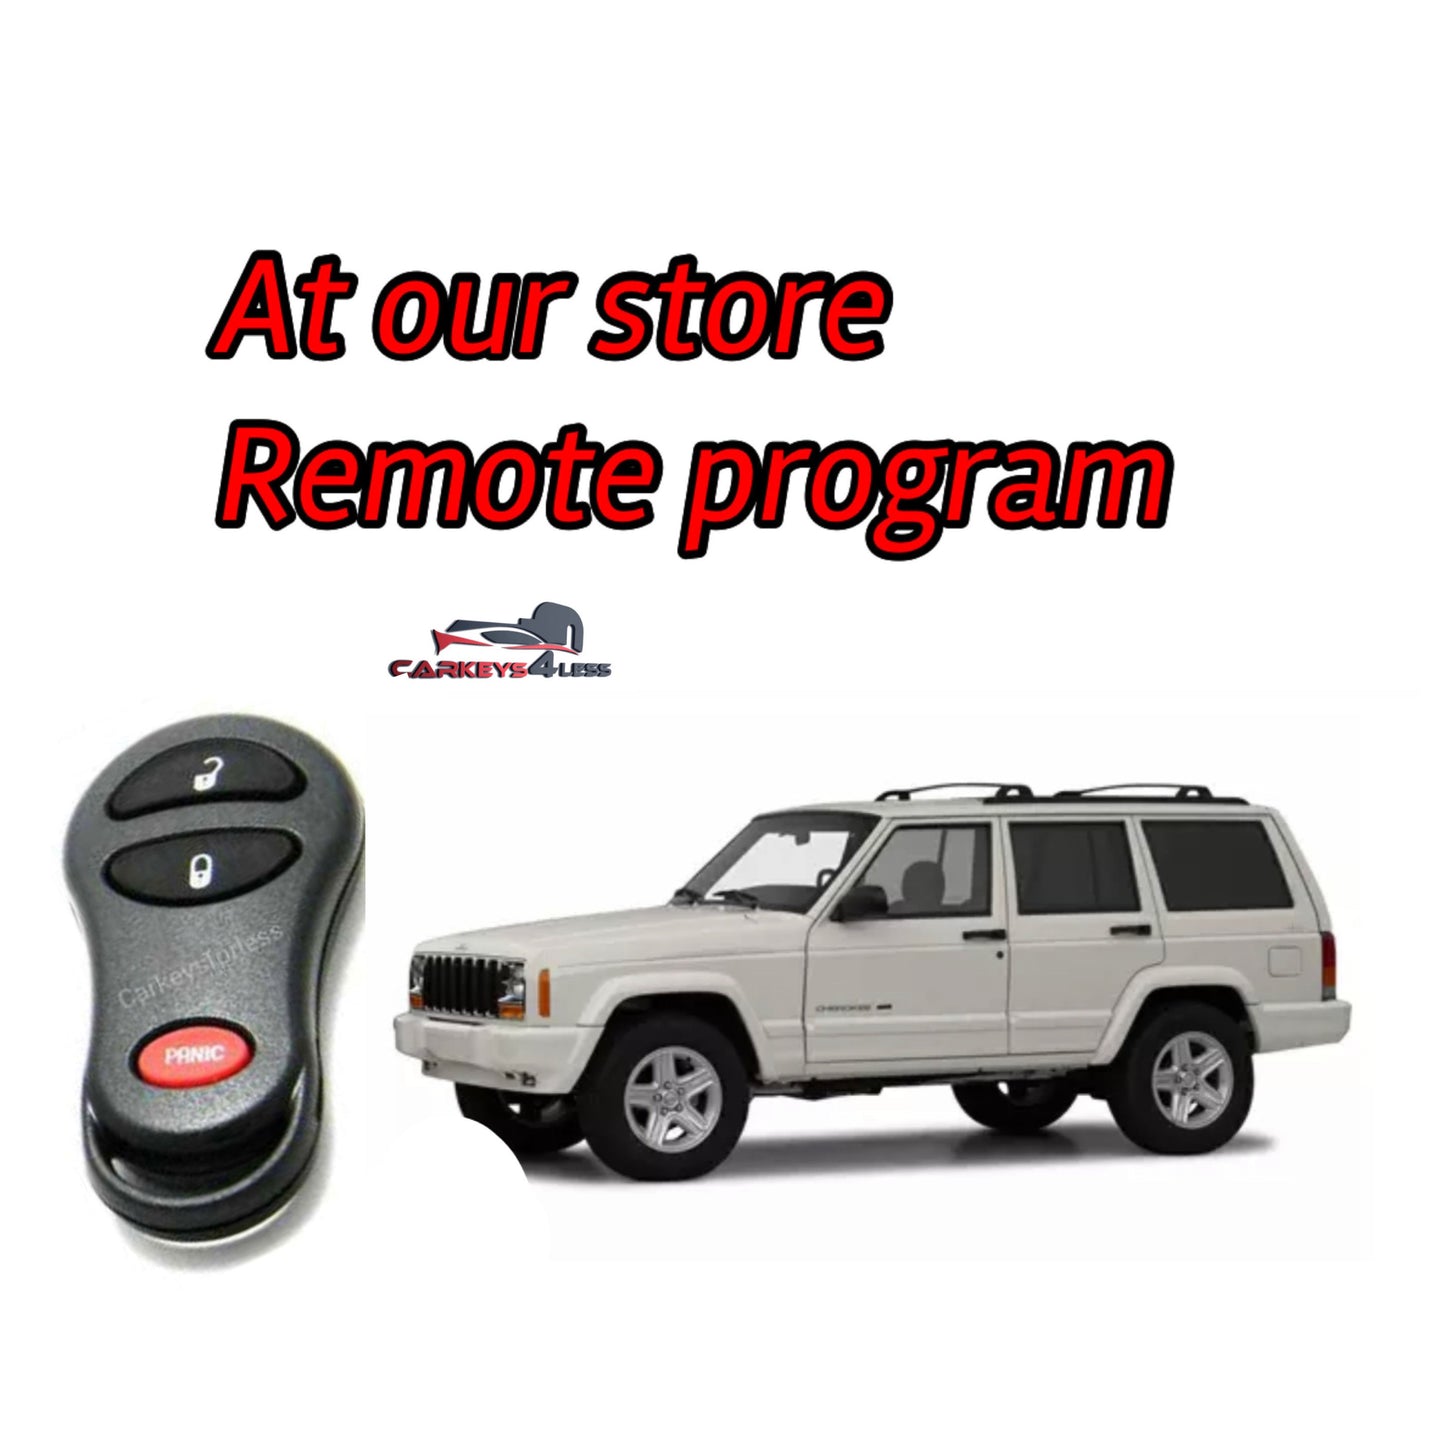 At our store an aftermarket dodge remote program